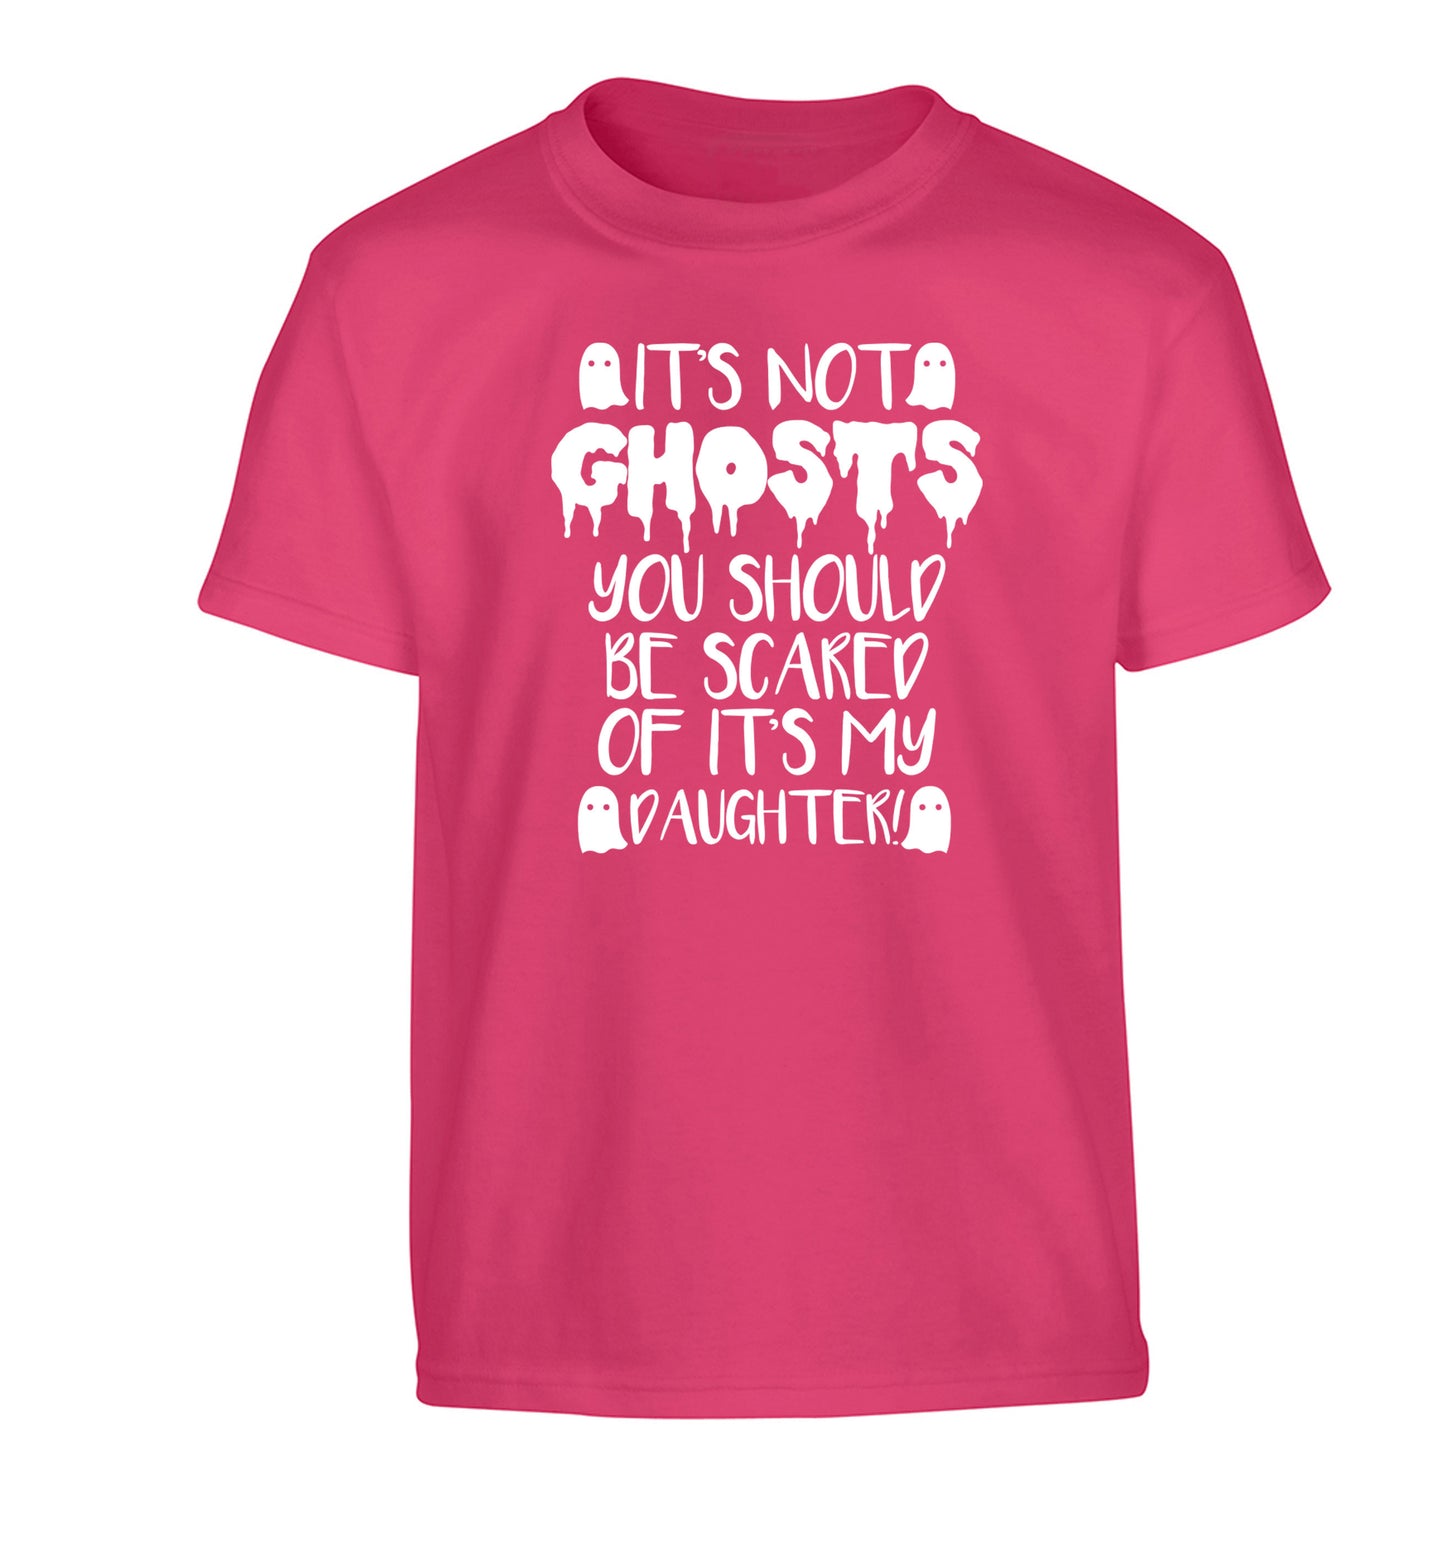 It's not ghosts you should be scared of it's my daughter! Children's pink Tshirt 12-14 Years